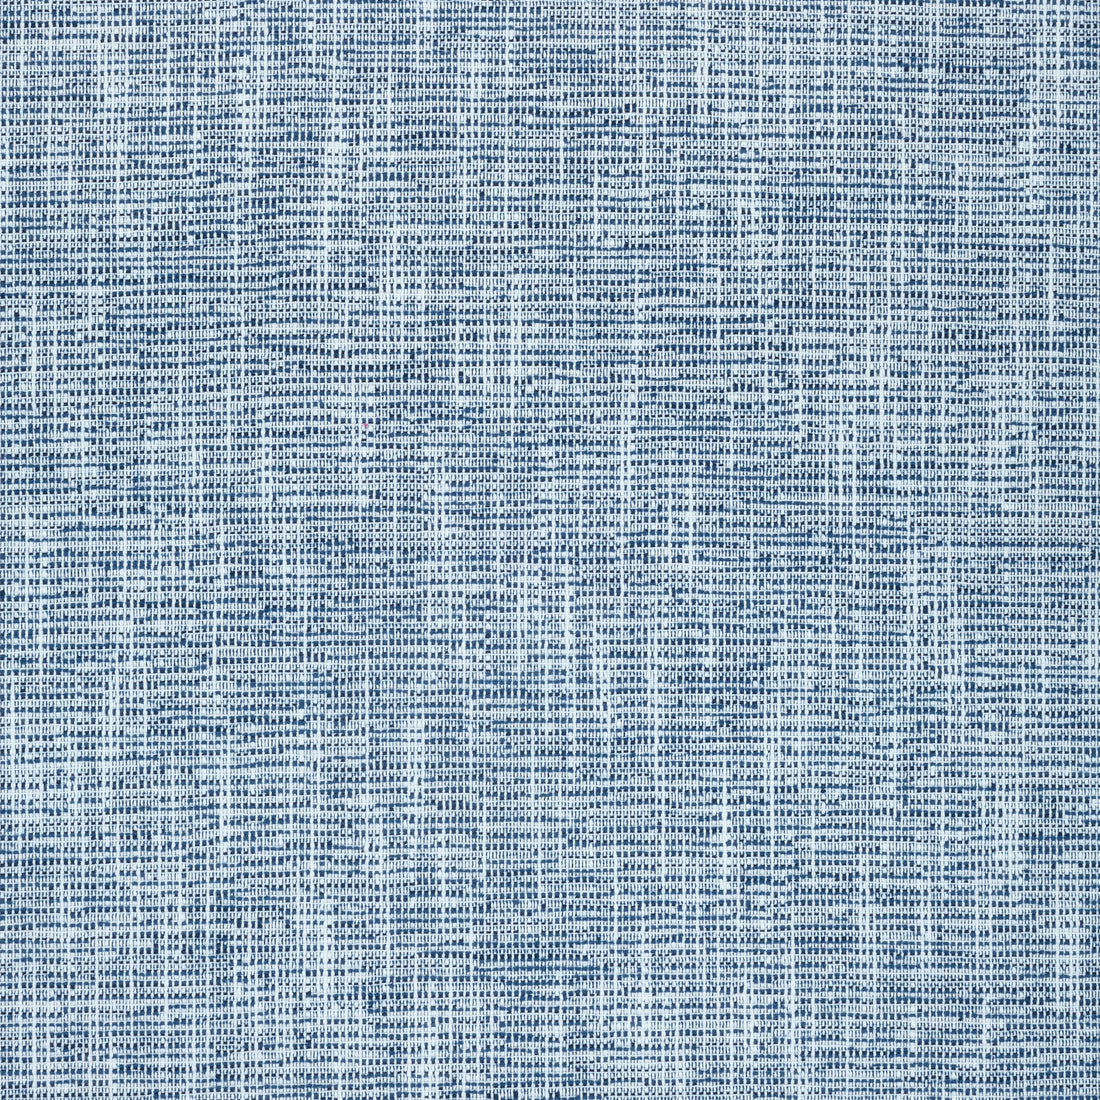 Piper fabric in navy color - pattern number W73445 - by Thibaut in the Landmark Textures collection